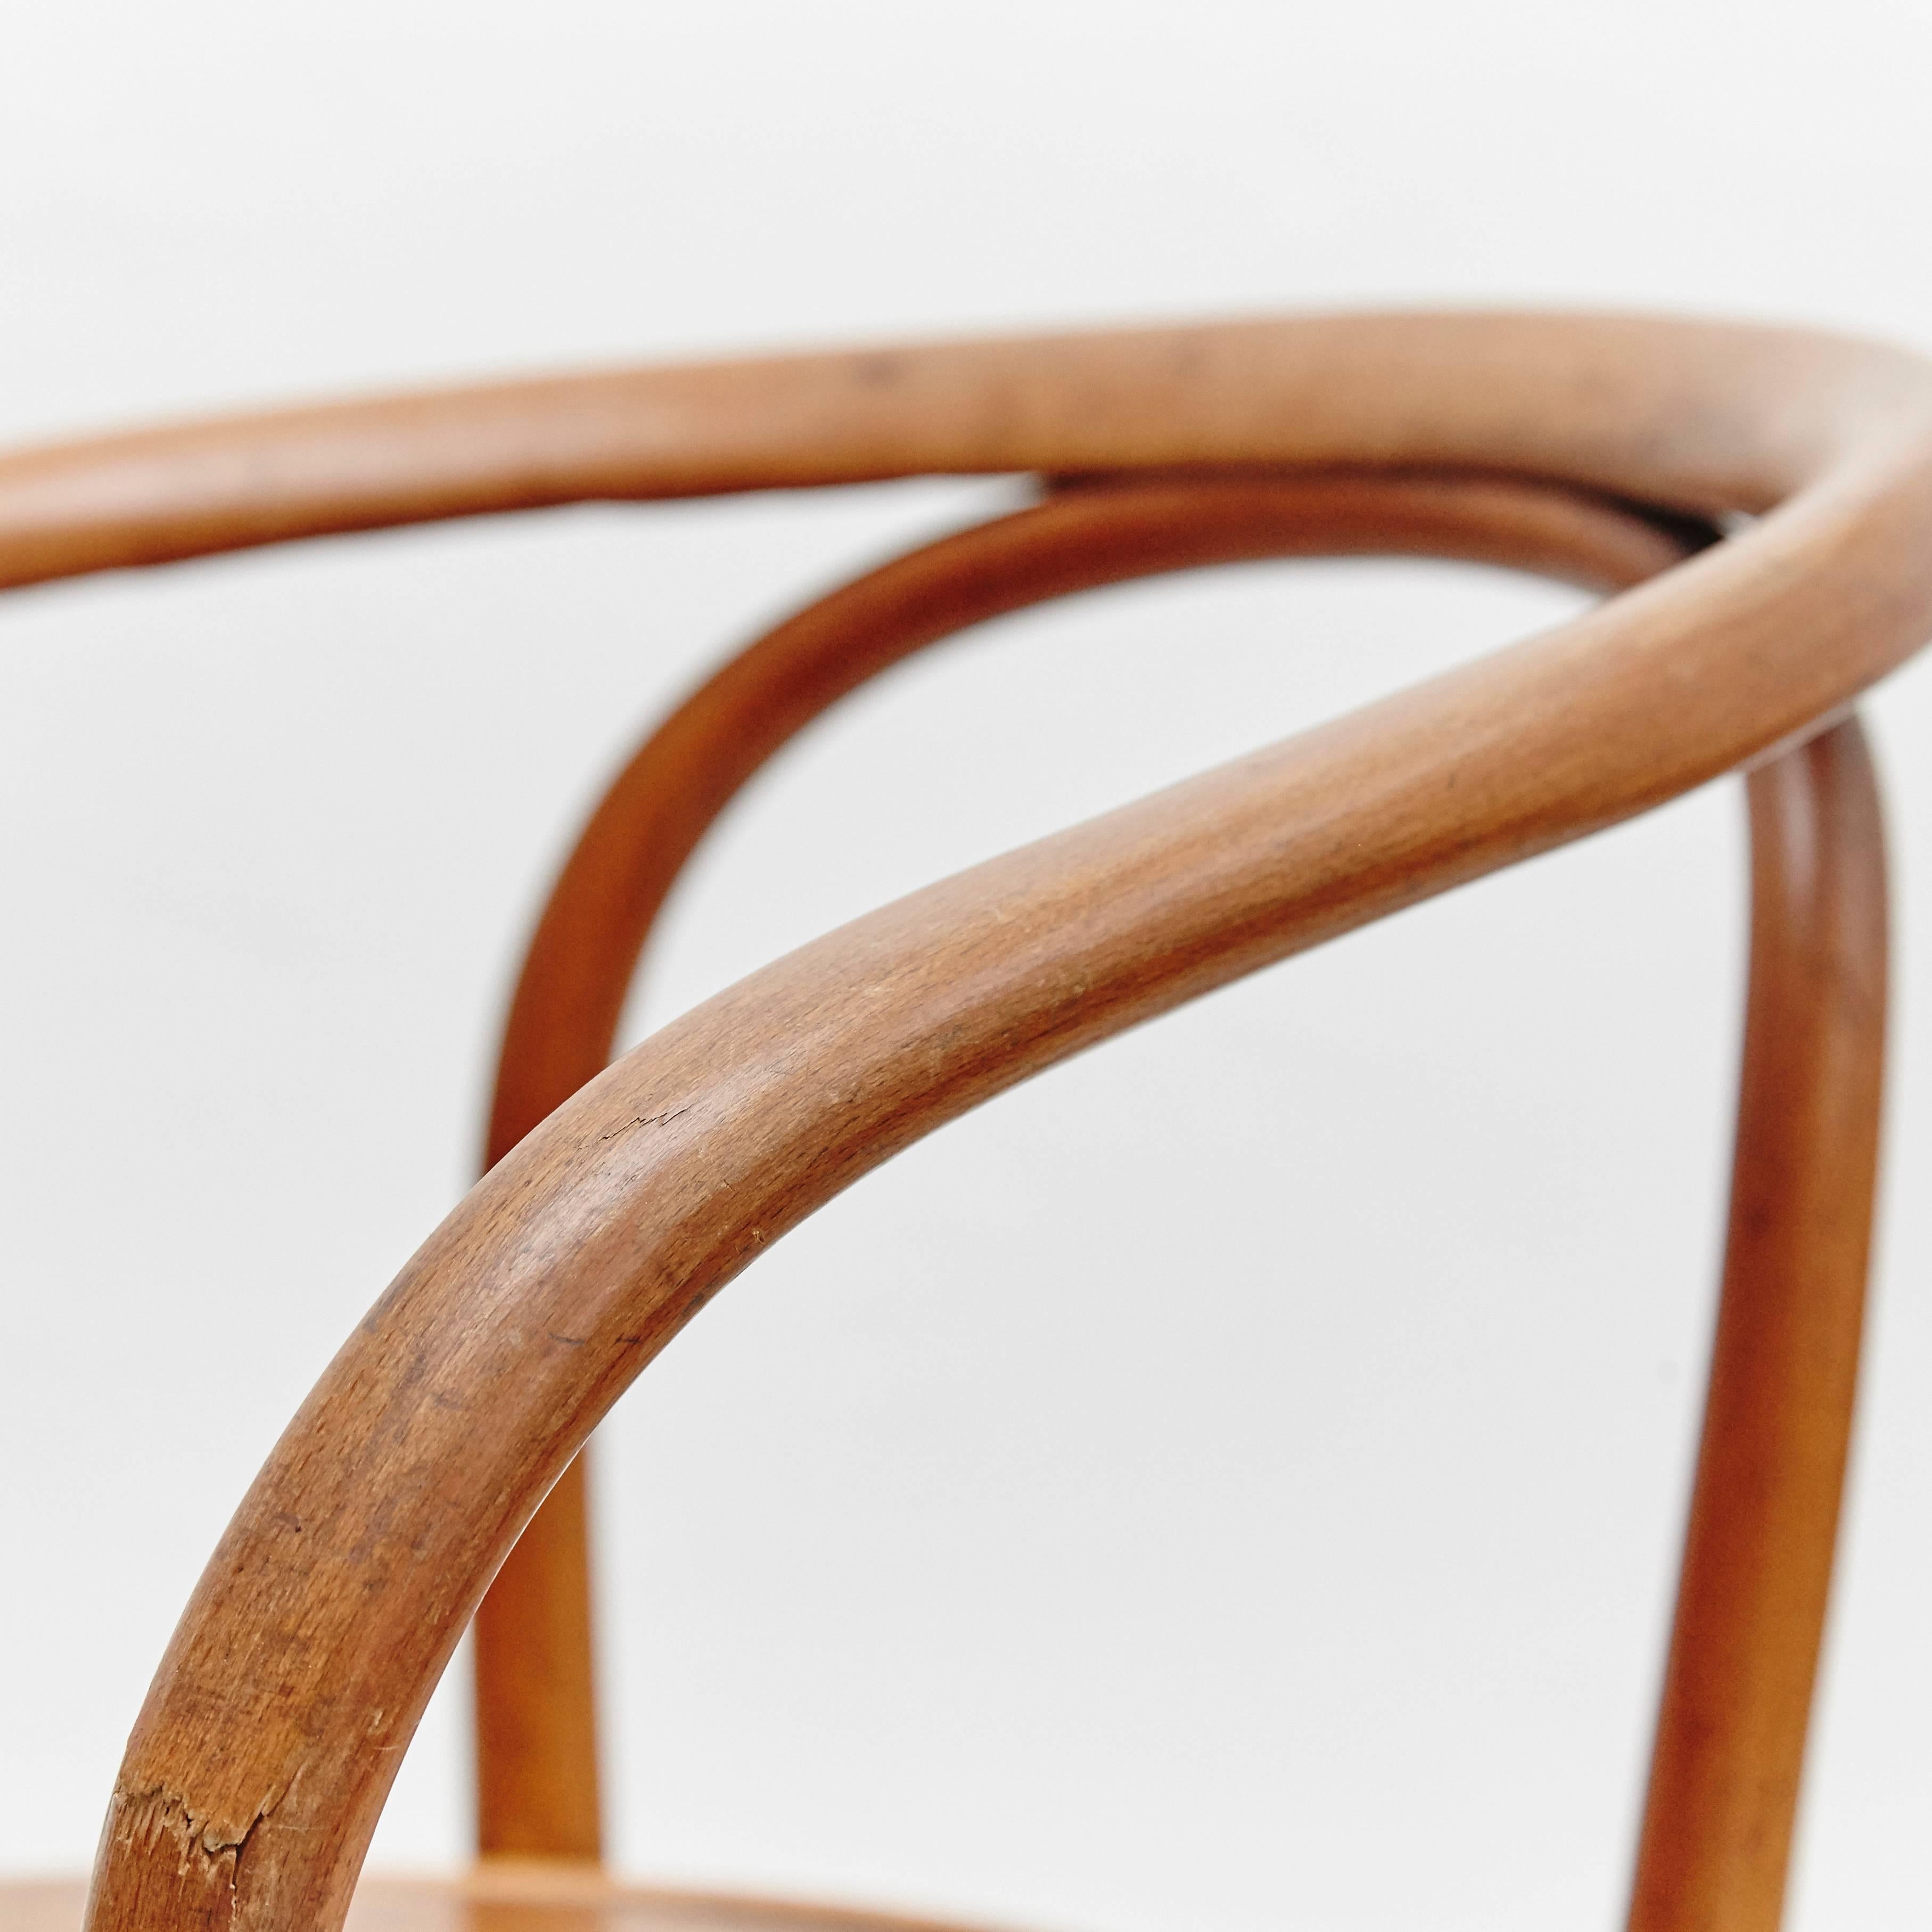 Wood Thonet 209 Armchair by August Thonet for Thonet, circa 1900